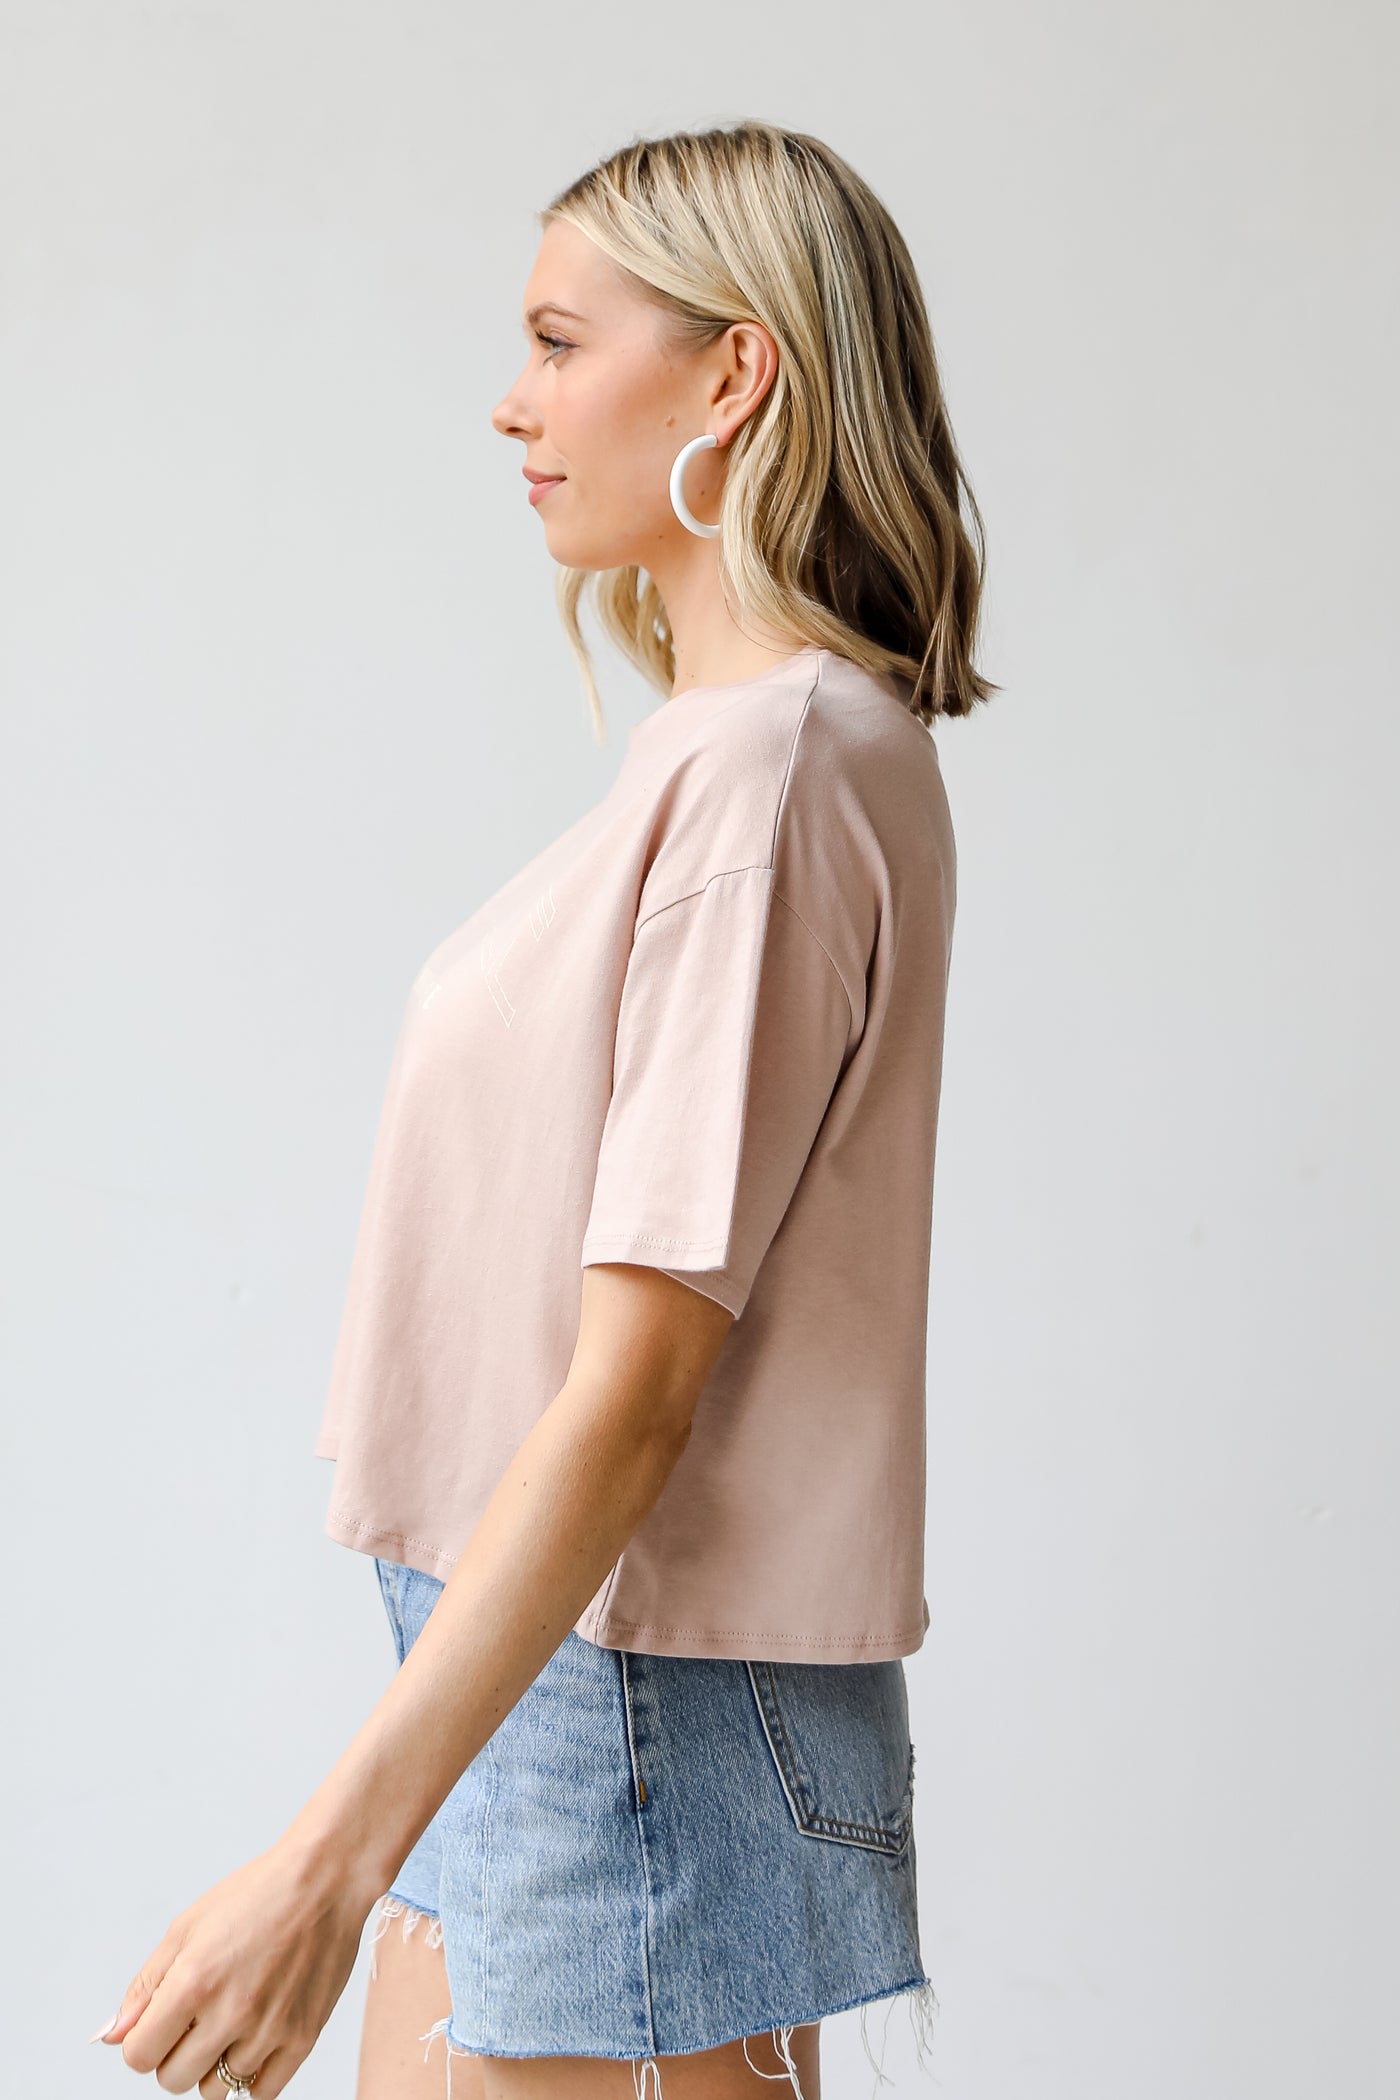 taupe Nashville Tennessee Cropped Graphic Tee side view